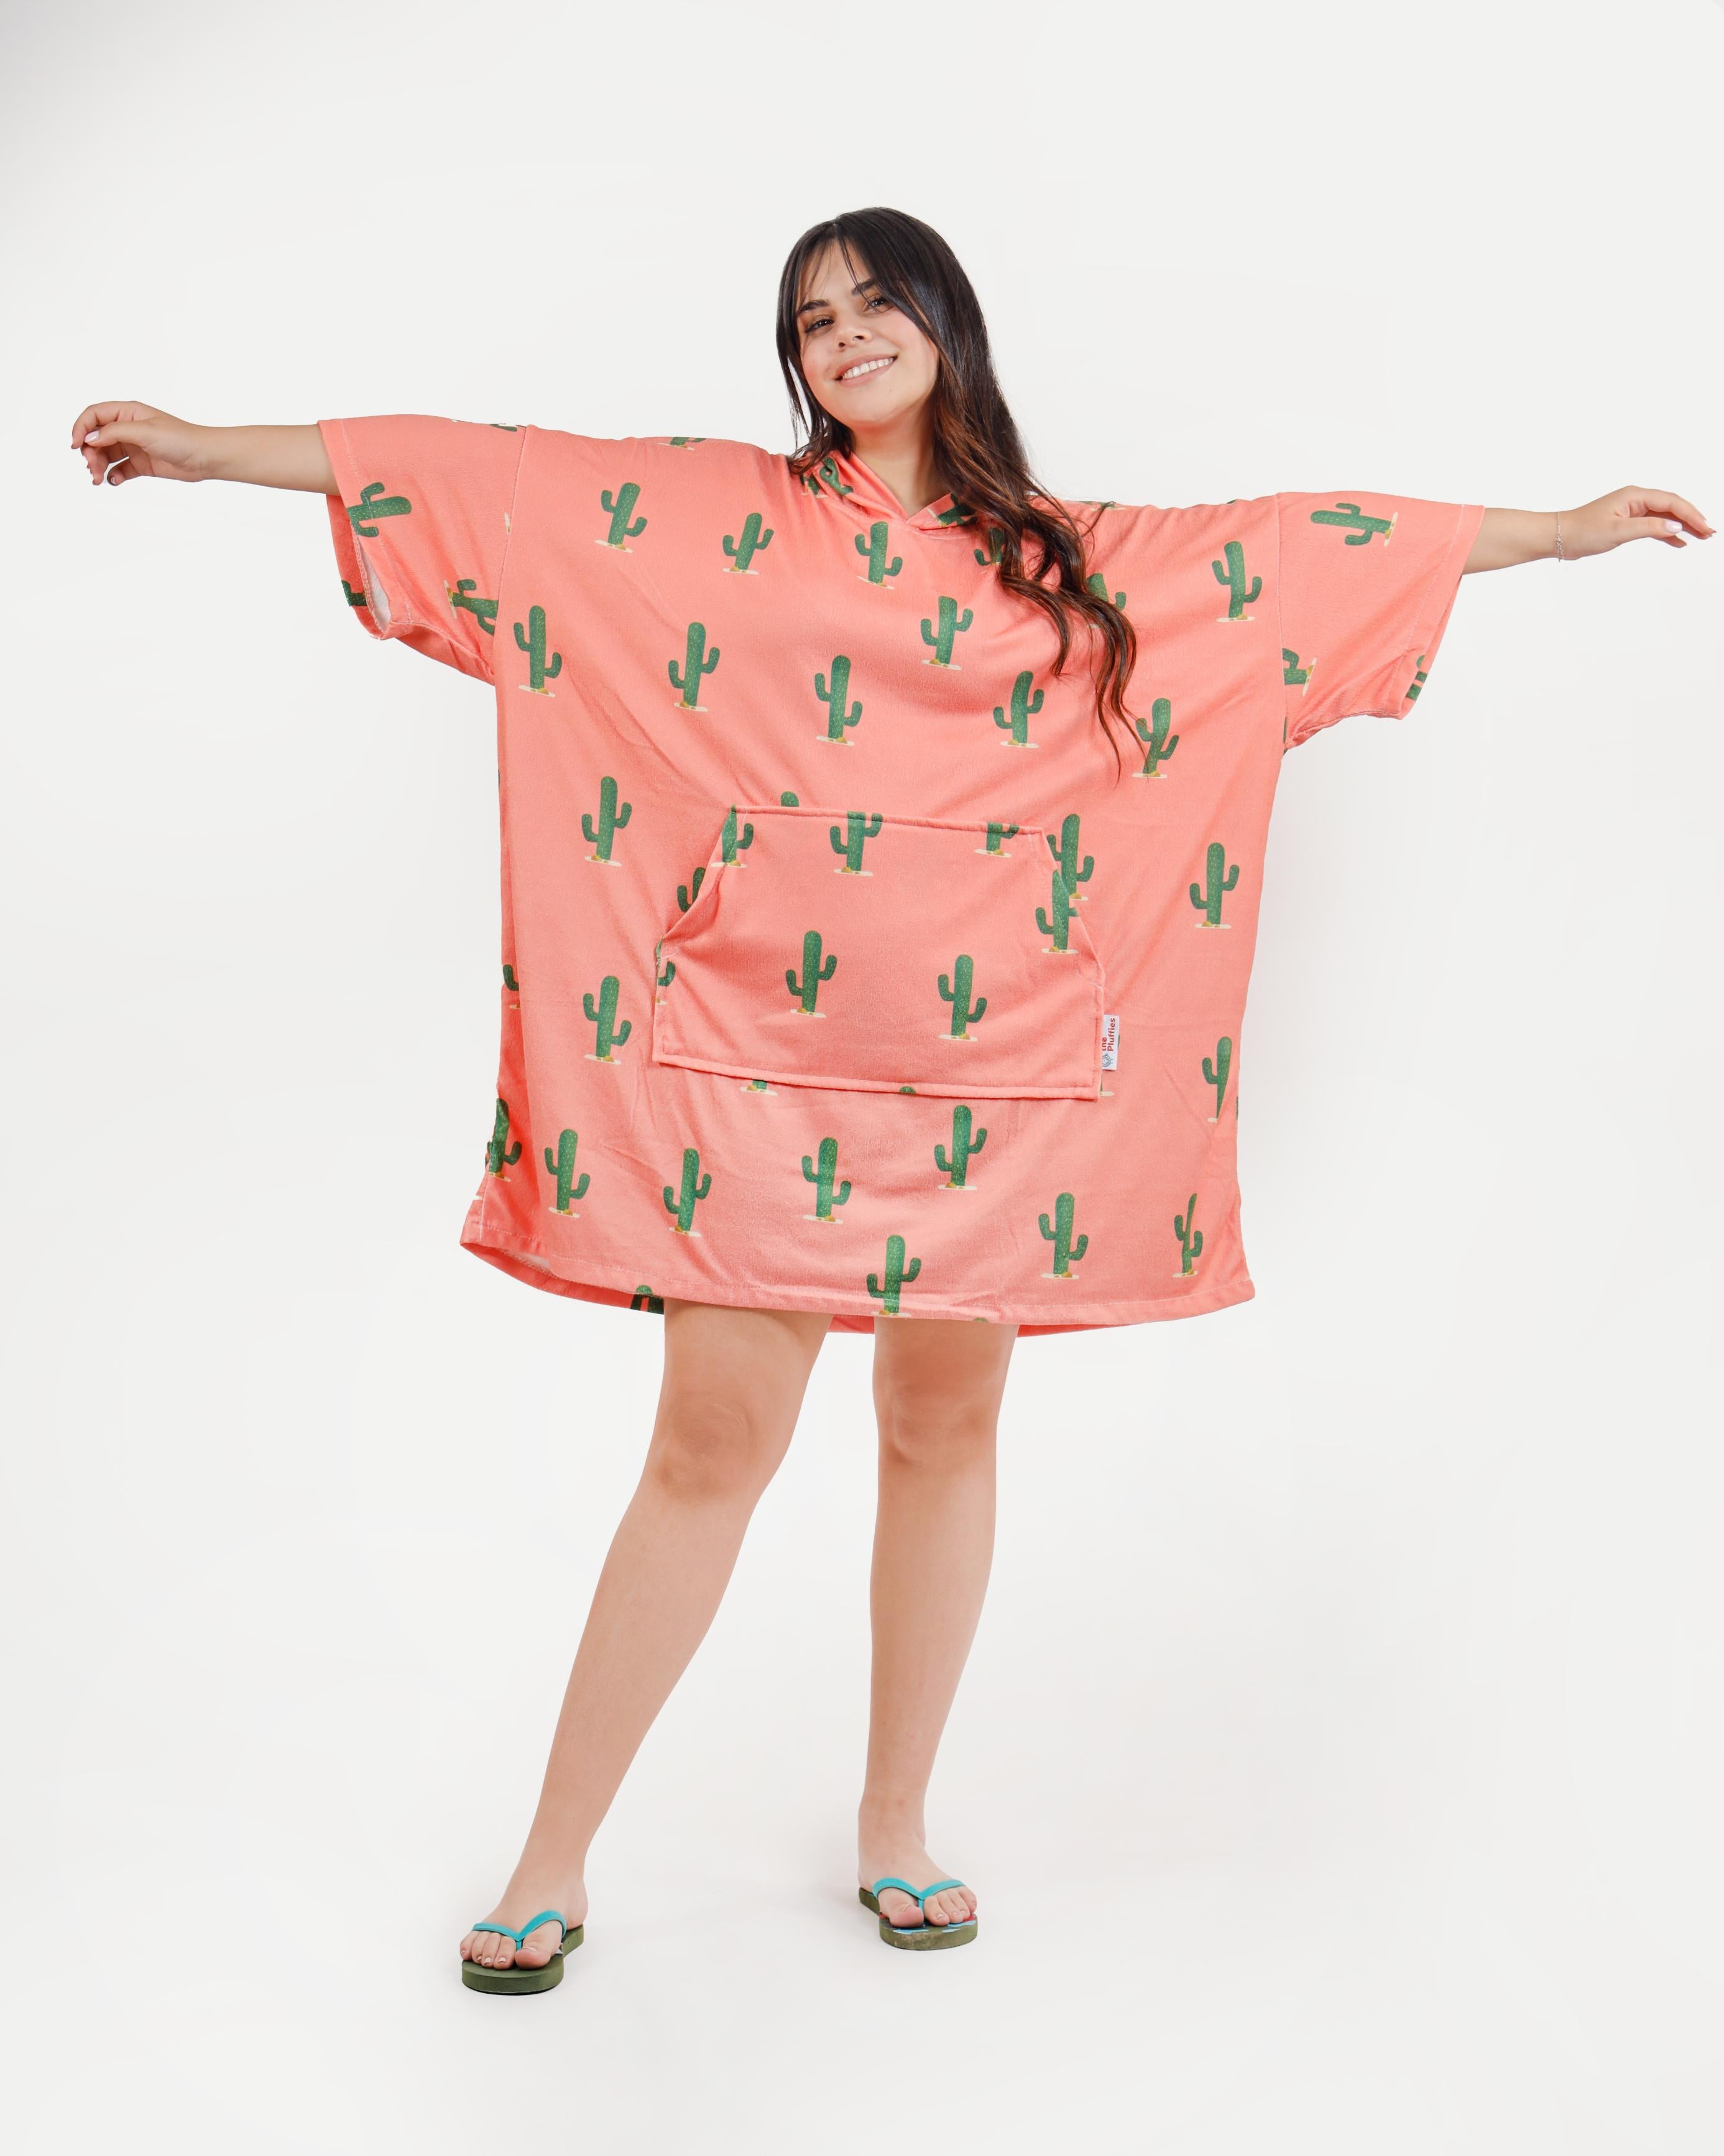 Cactus Pluffie Towel Poncho - THE PLUFFIES